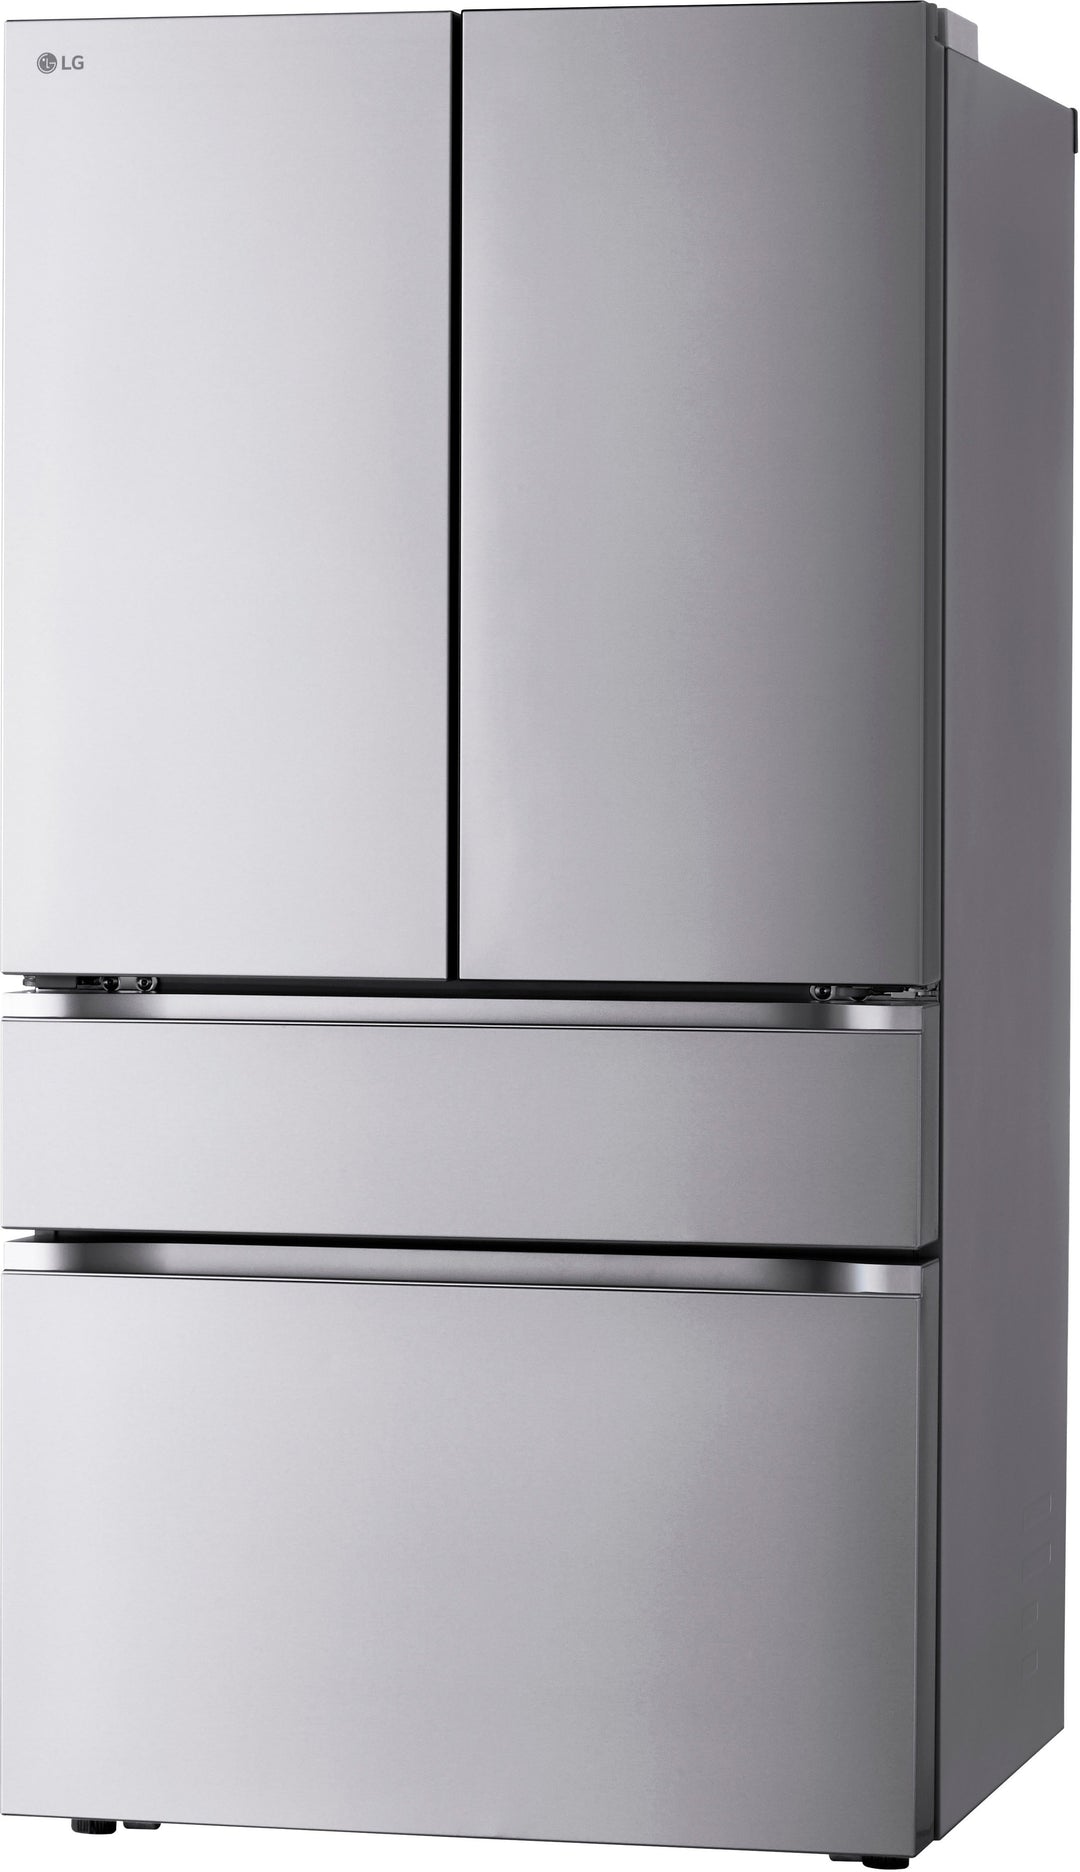 LG - 29.6 Cu. Ft. French Door Smart Refrigerator with Full-Convert Drawer - Stainless Steel_2